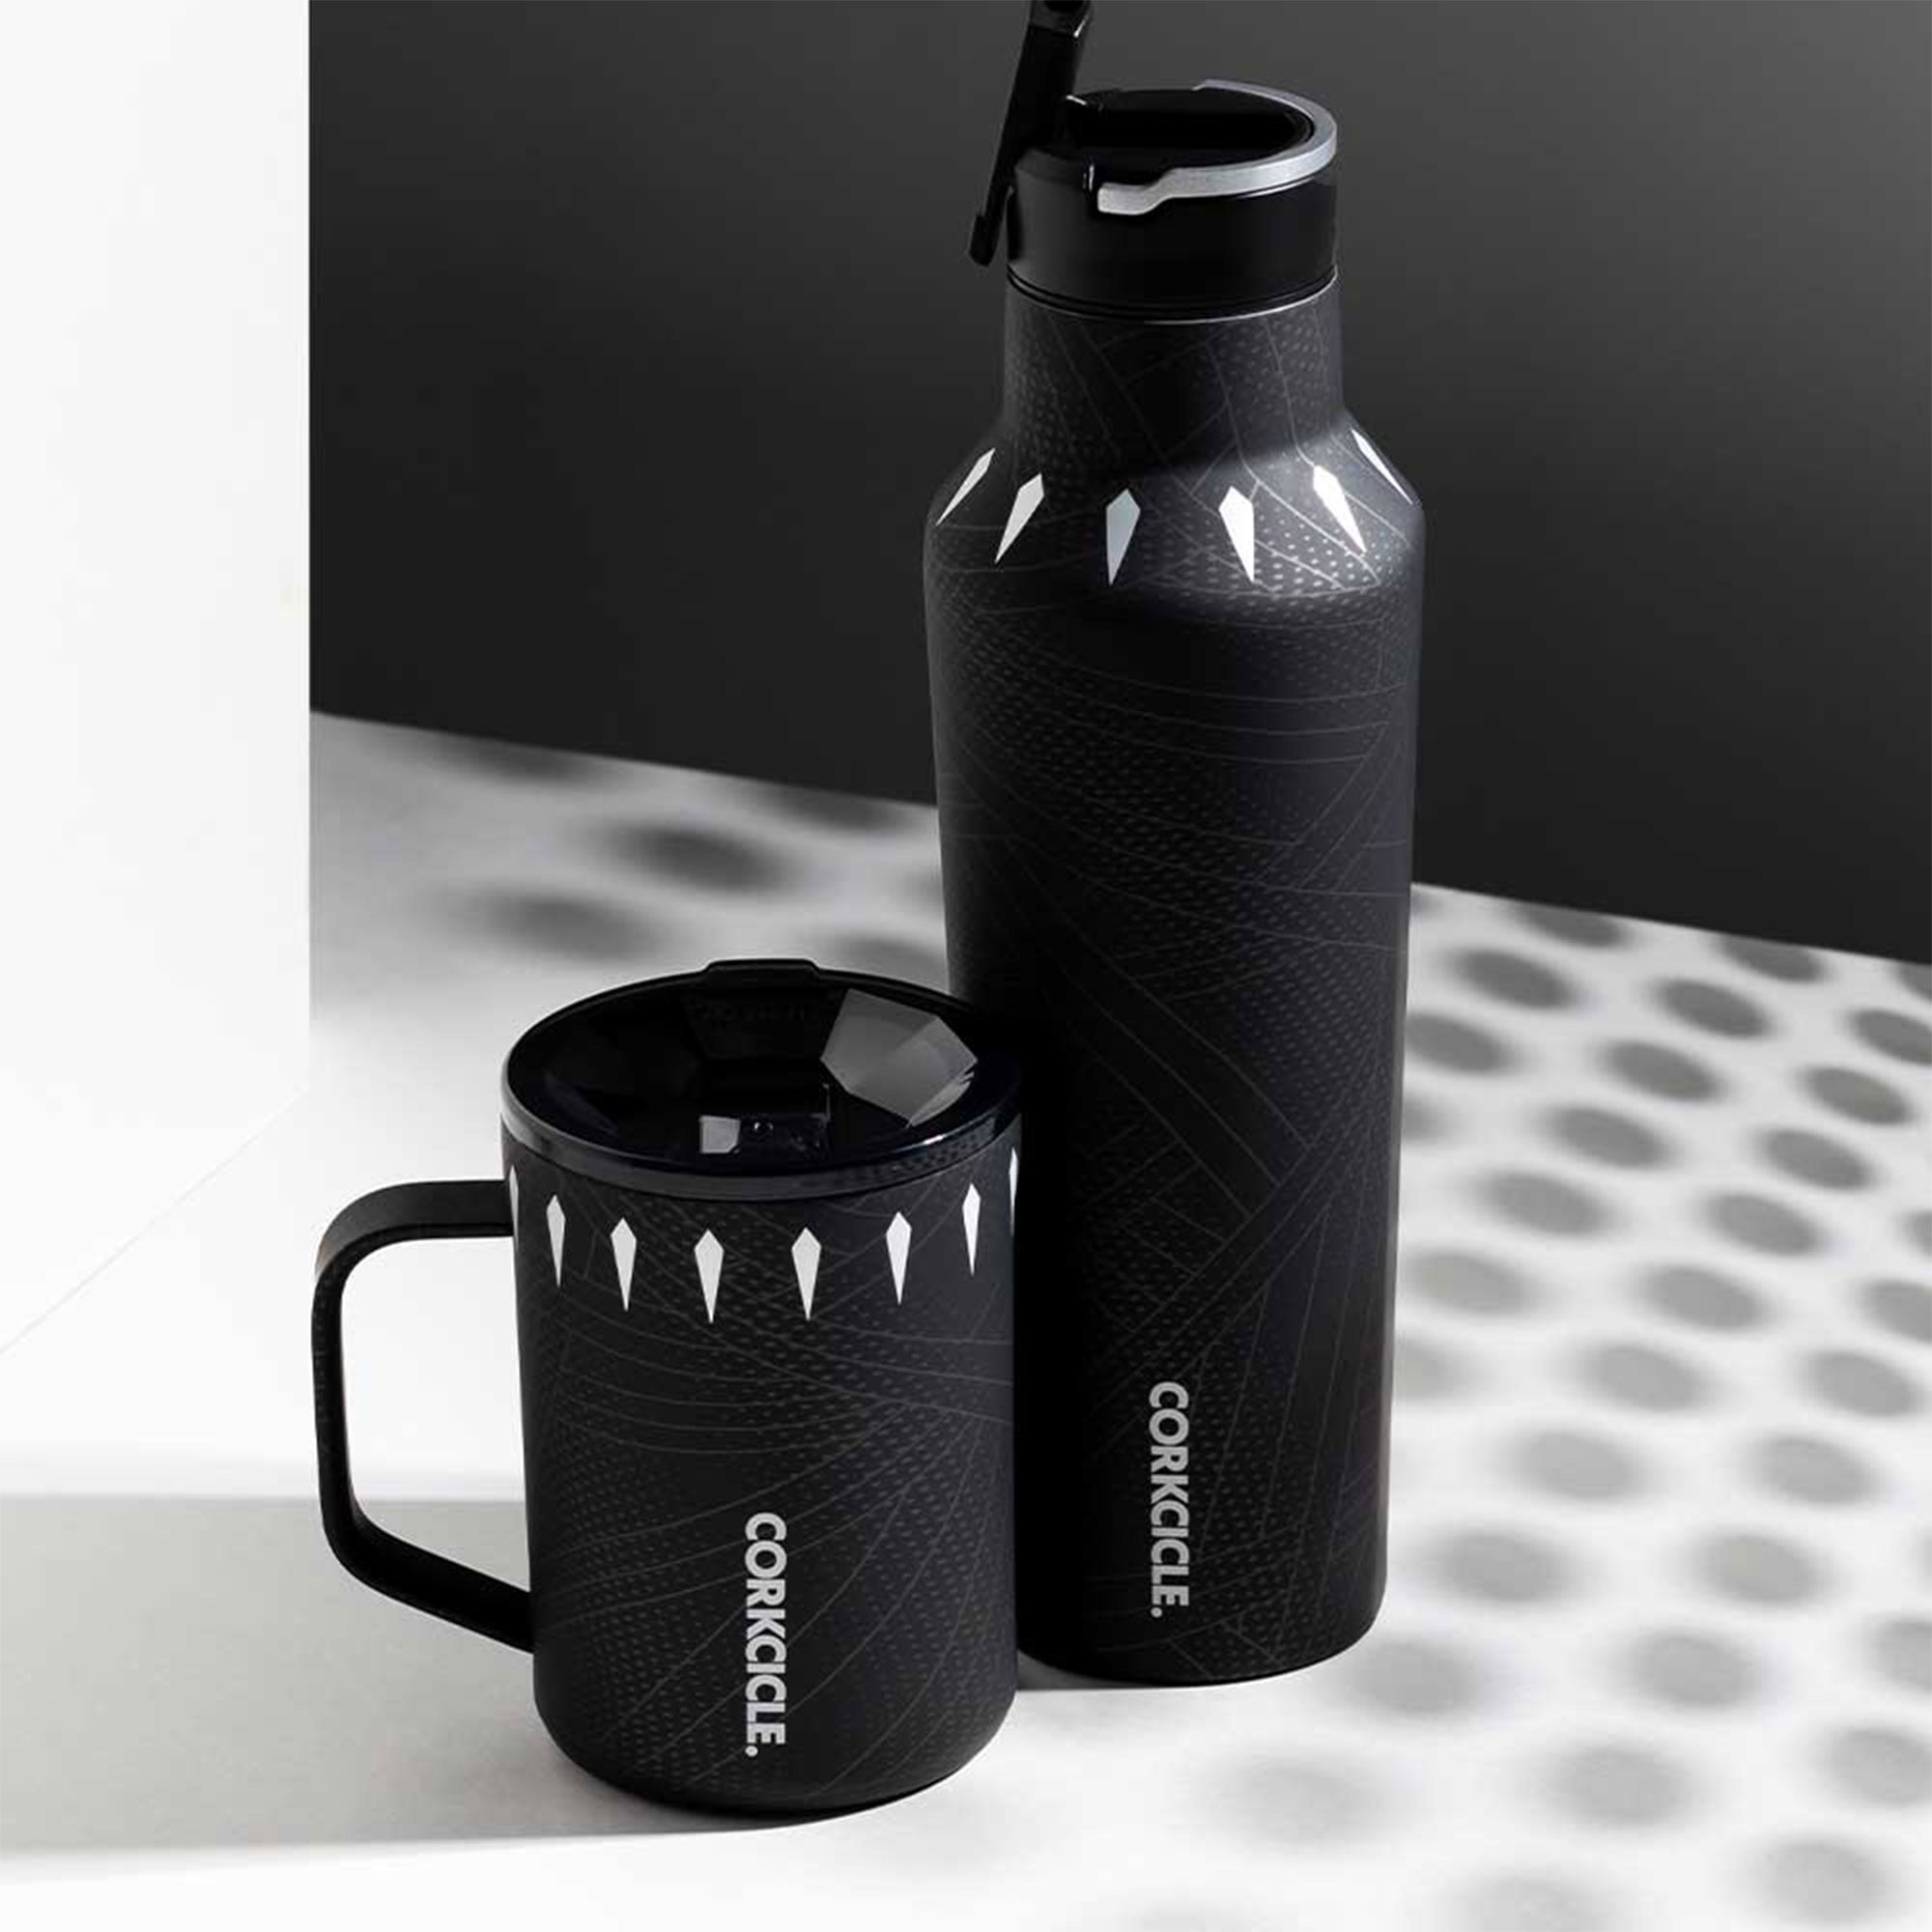 Corkcicle Triple Insulated Coffee Mug with Lid, Stainless Steel Camping  Tumbler with Handle, Hot for…See more Corkcicle Triple Insulated Coffee Mug